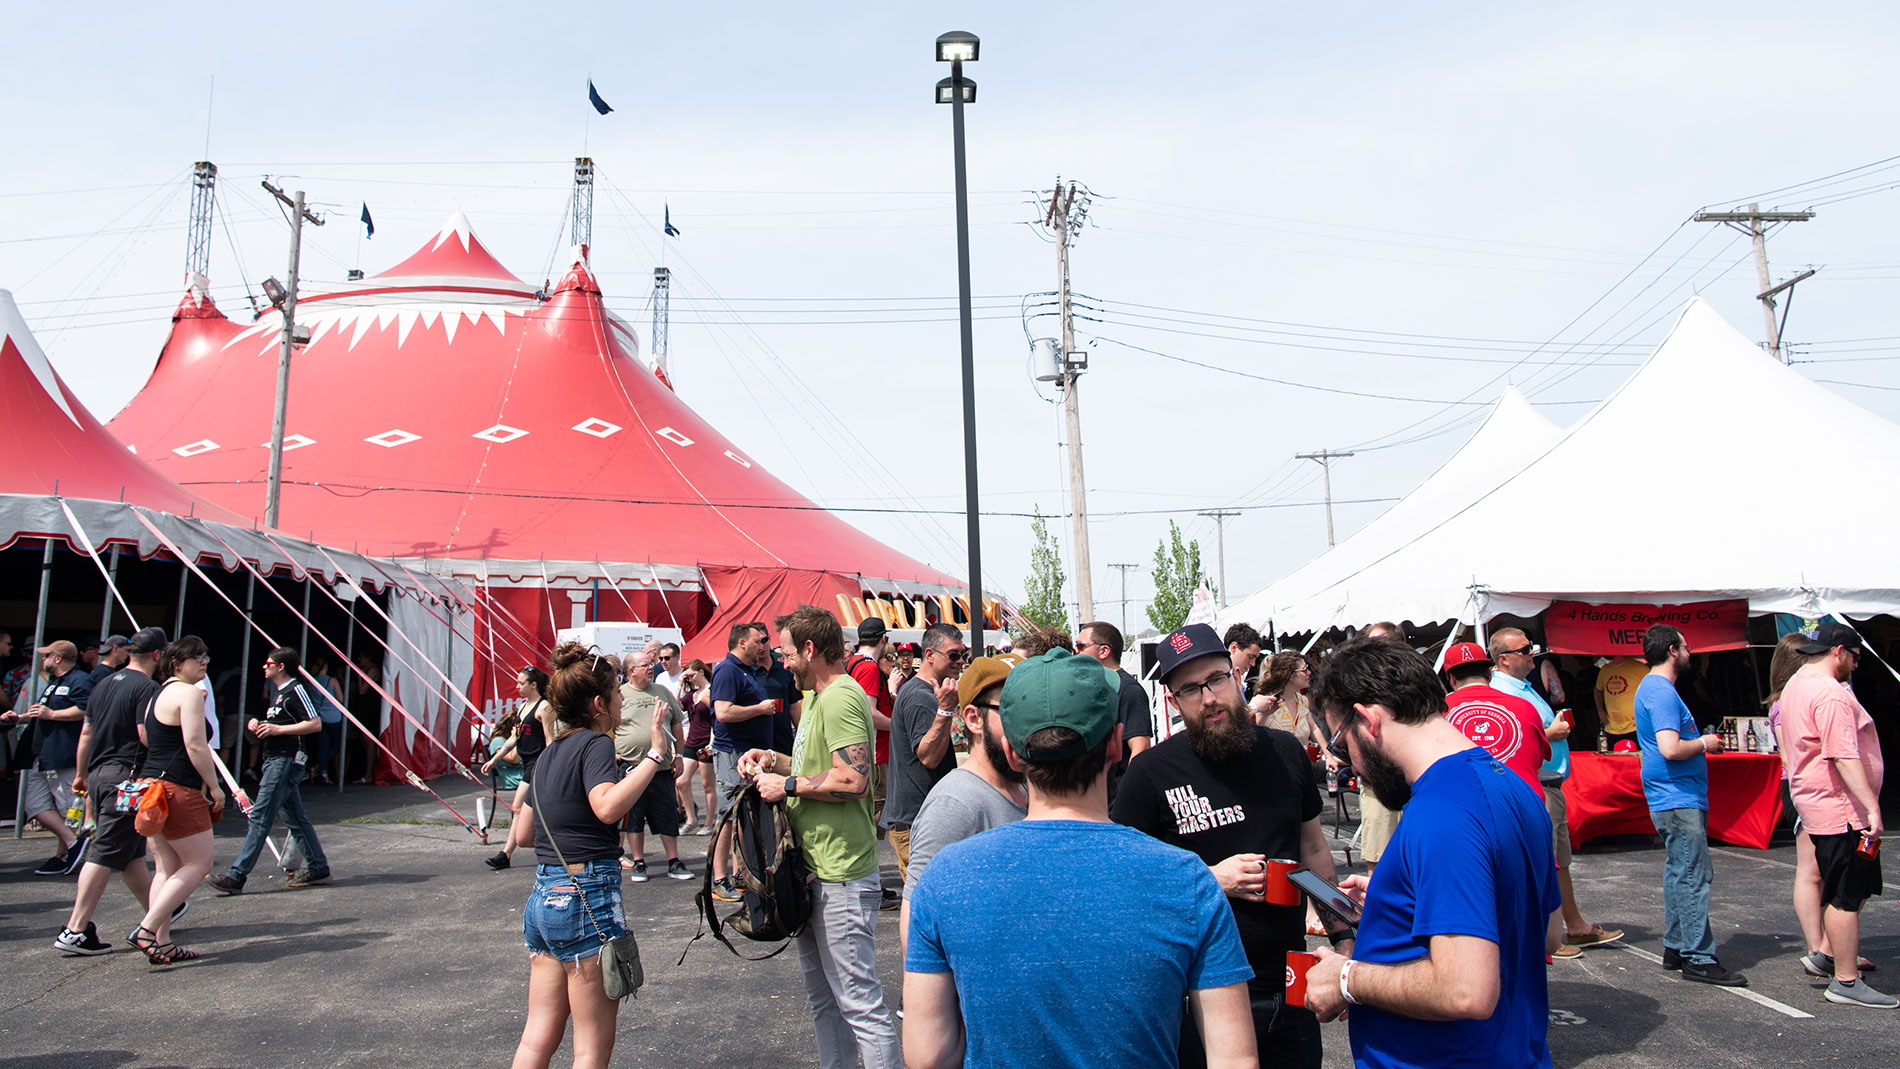 4 Hands Brewing Co.’s Lupulin Carnival is set for Saturday in Midtown St. Louis